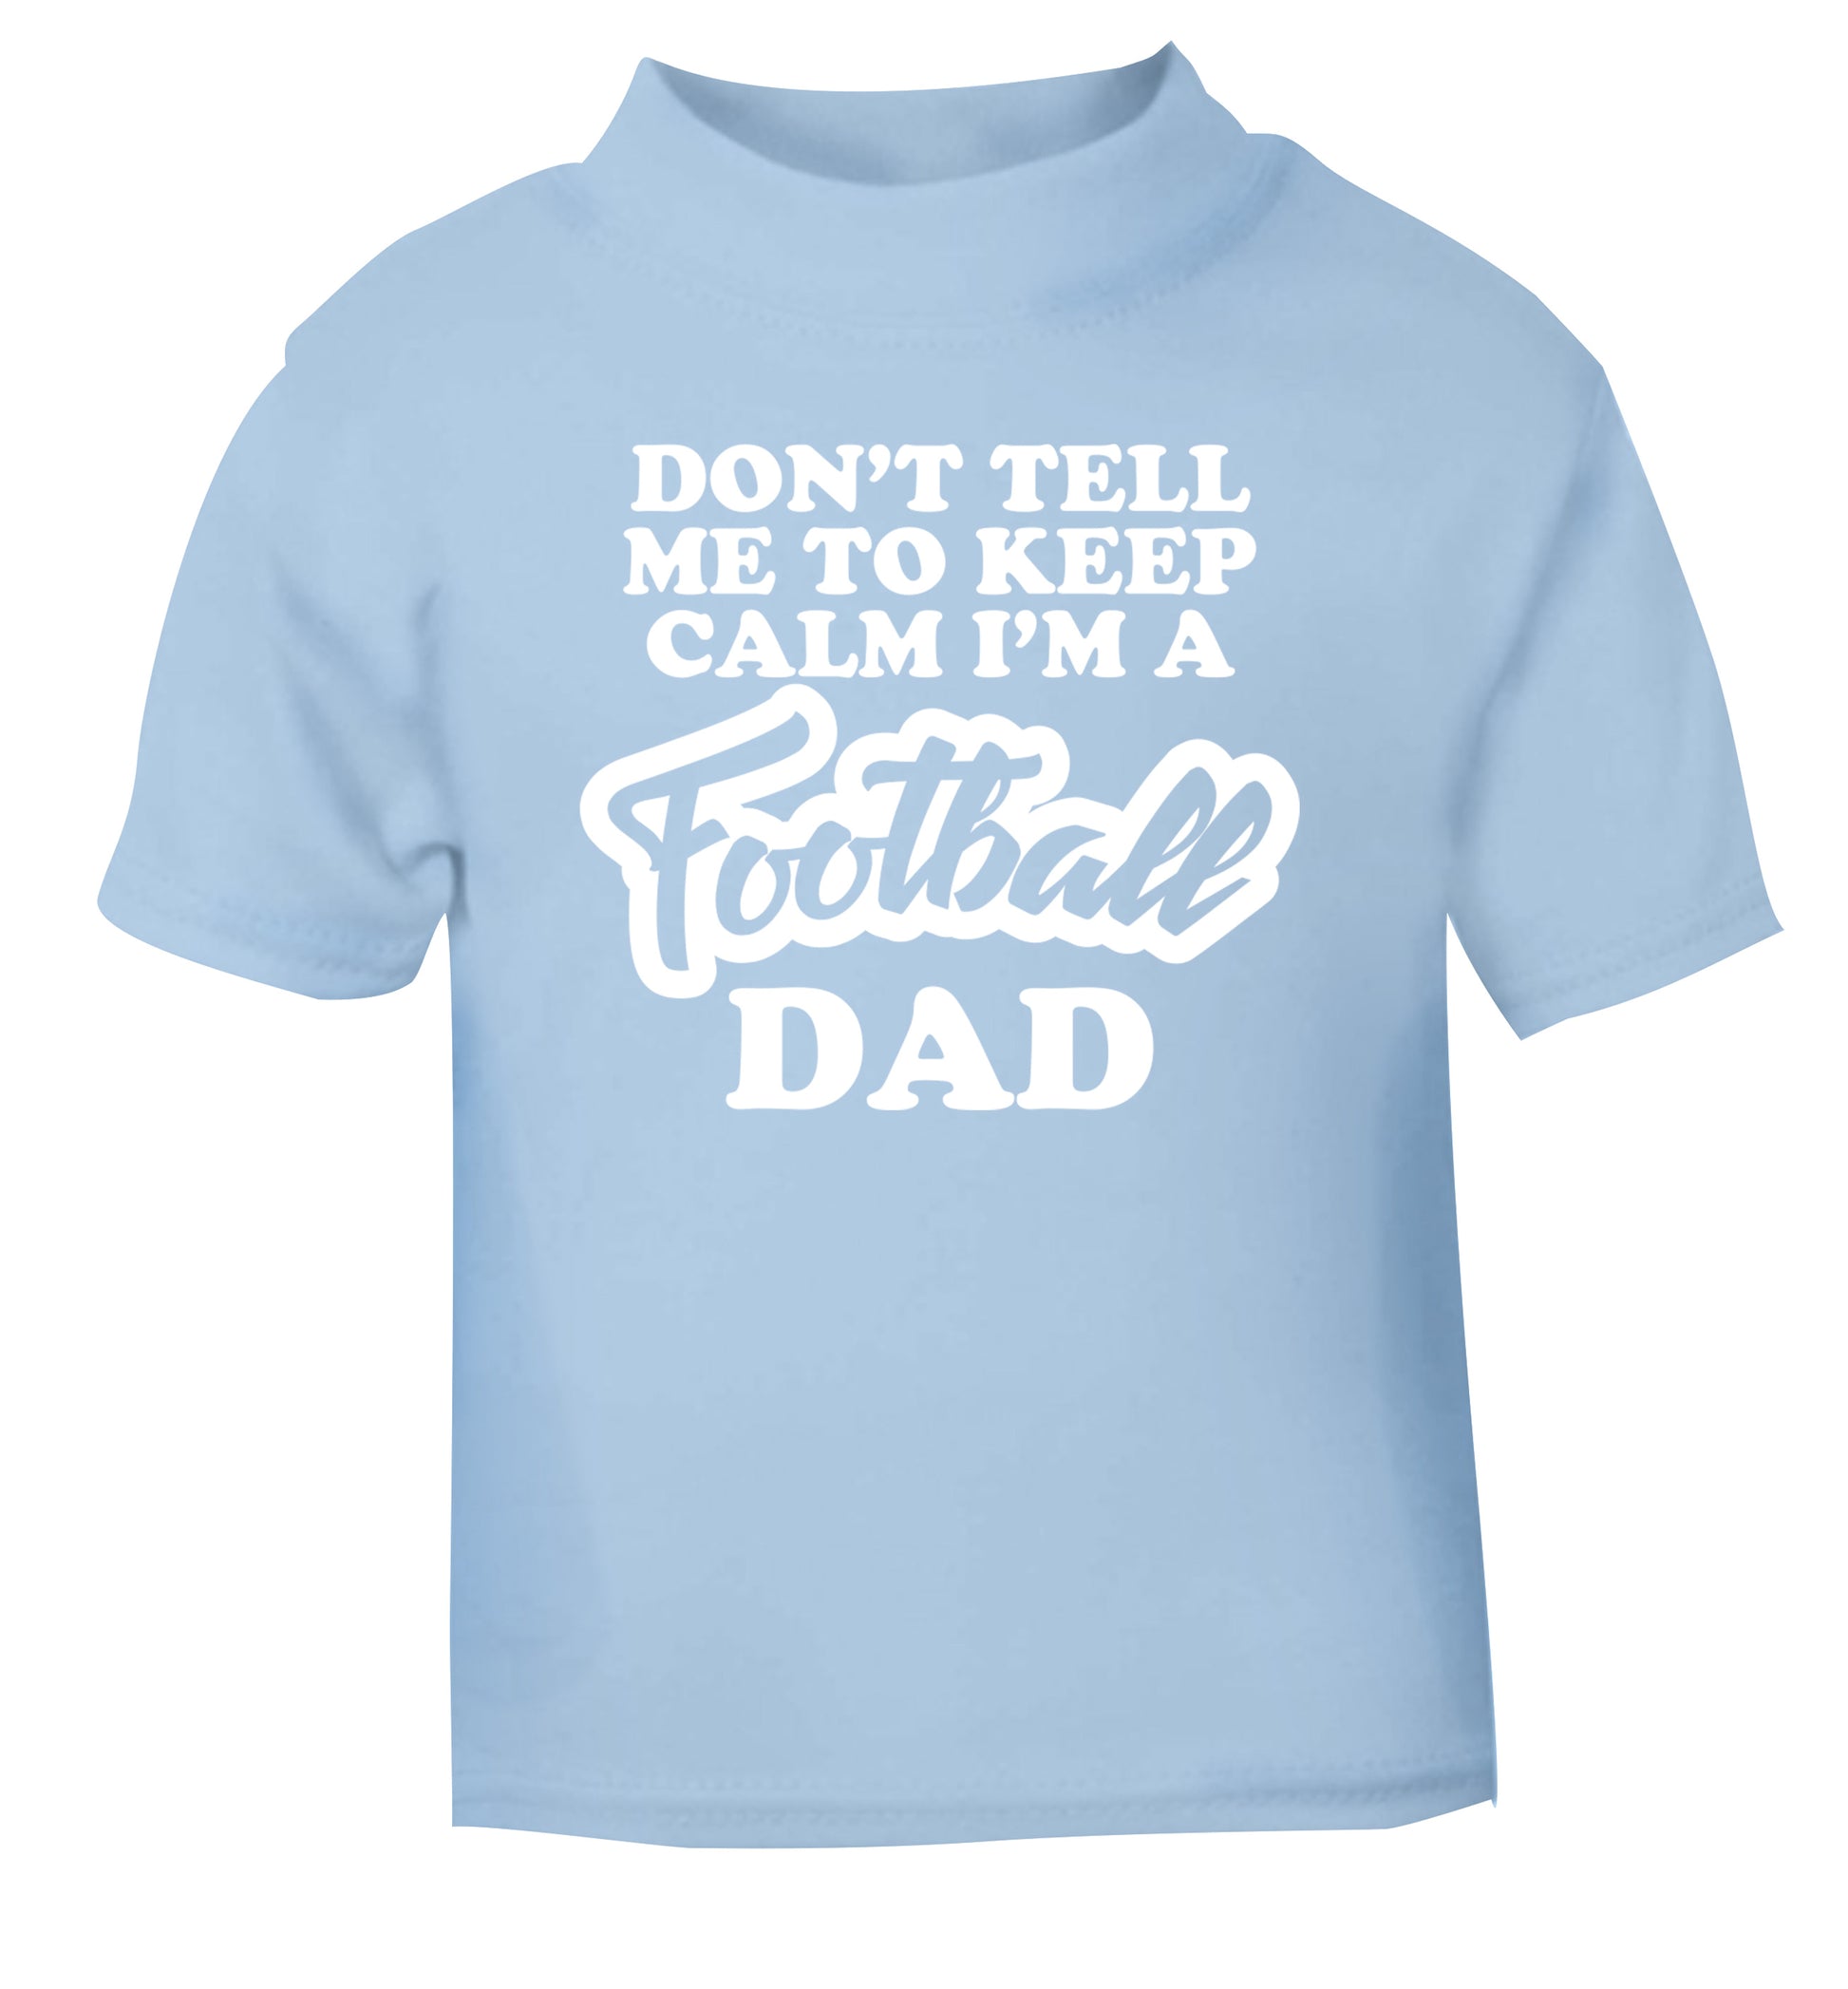 Don't tell me to keep calm I'm a football dad light blue Baby Toddler Tshirt 2 Years